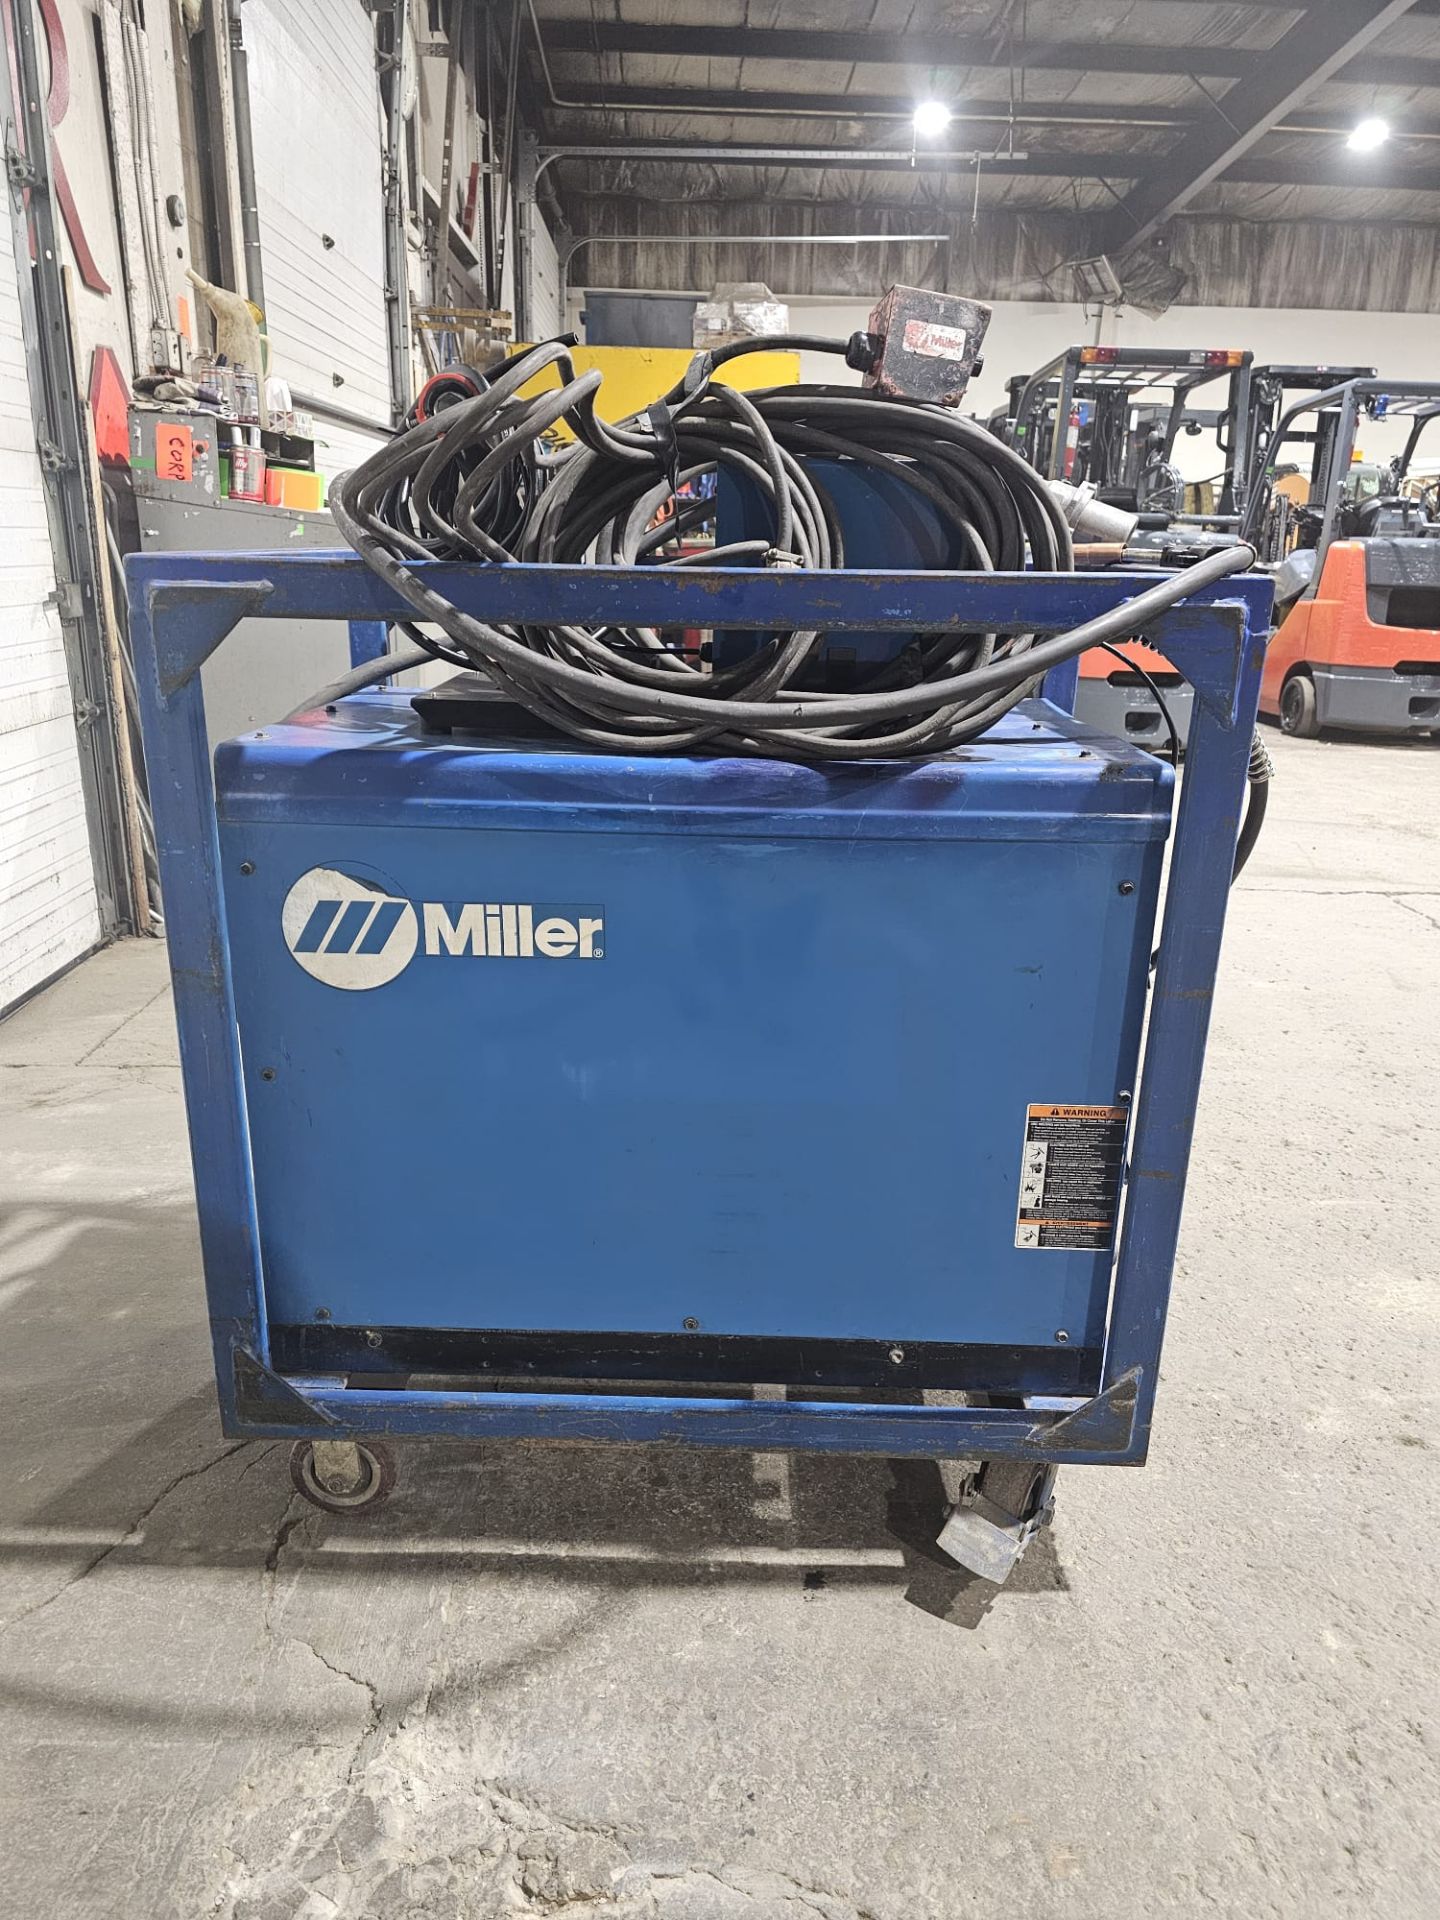 Miller Dimension 652 Mig Welder 650 Amp Mig Tig Stick Multi Process Power Source with 22A Wire - Image 10 of 10